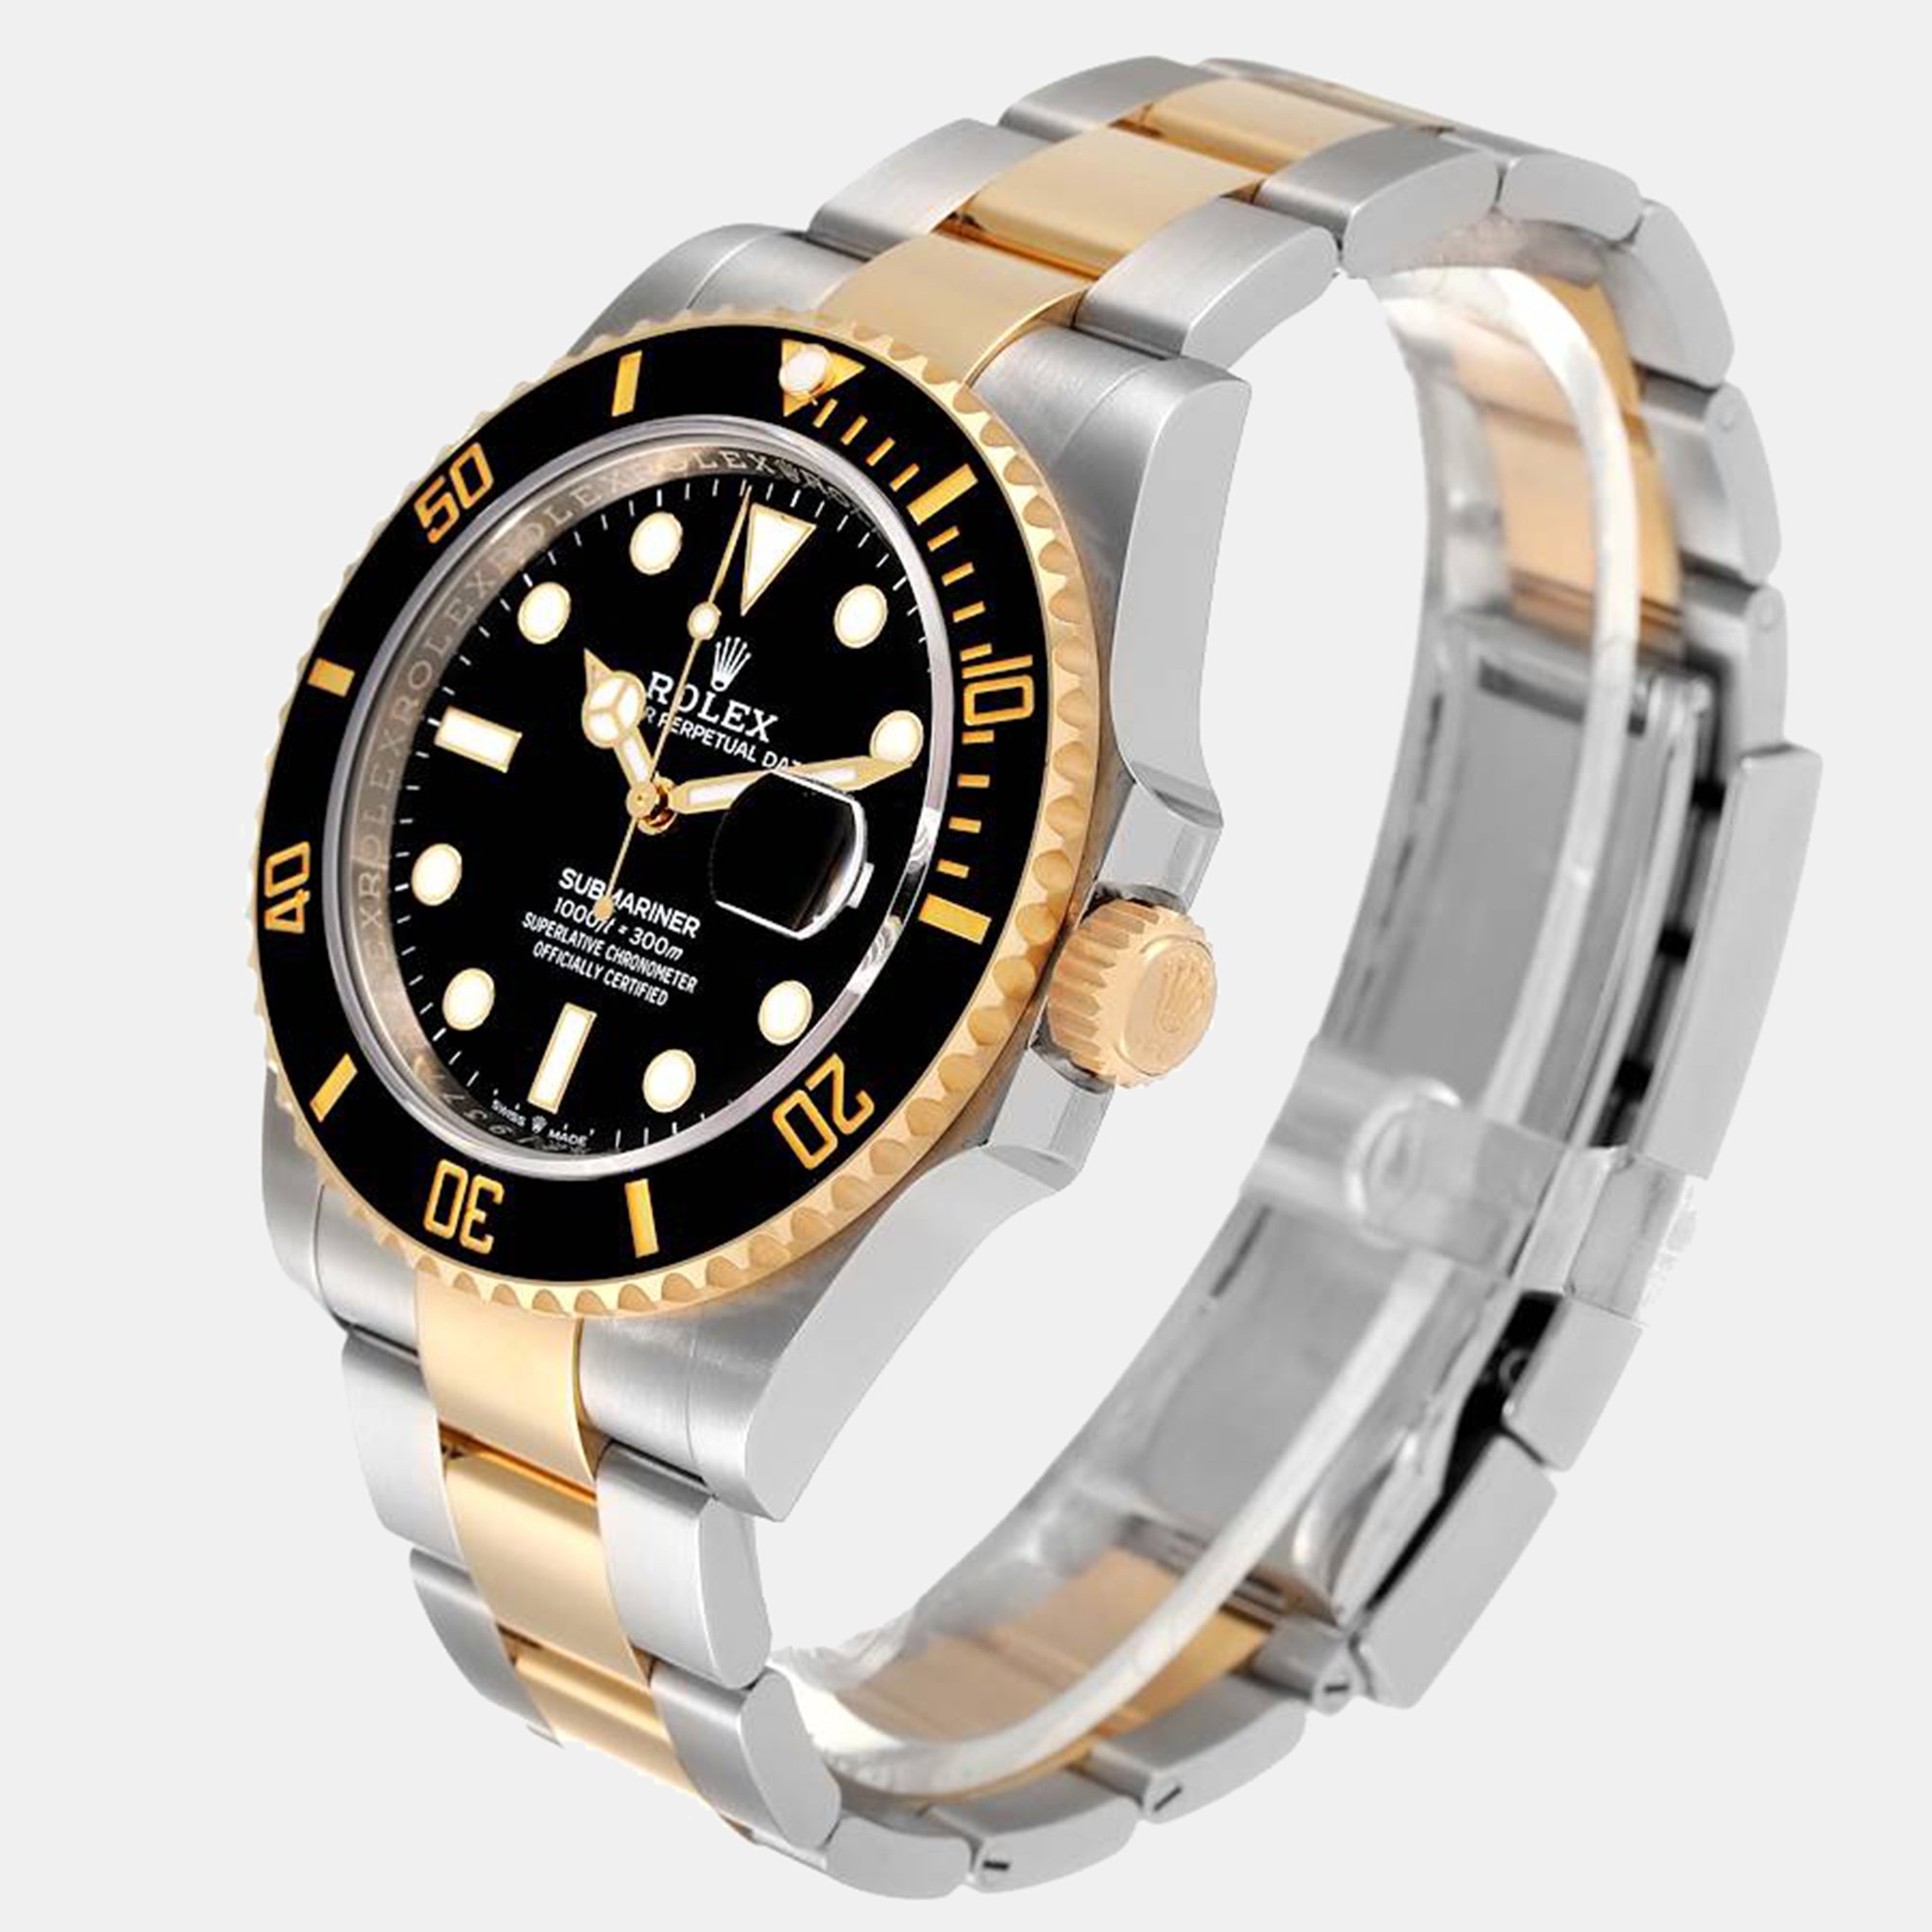 Rolex Black 18k Yellow Gold And Stainless Steel Submariner 126613 LN Automatic Men's Wristwatch 41 Mm